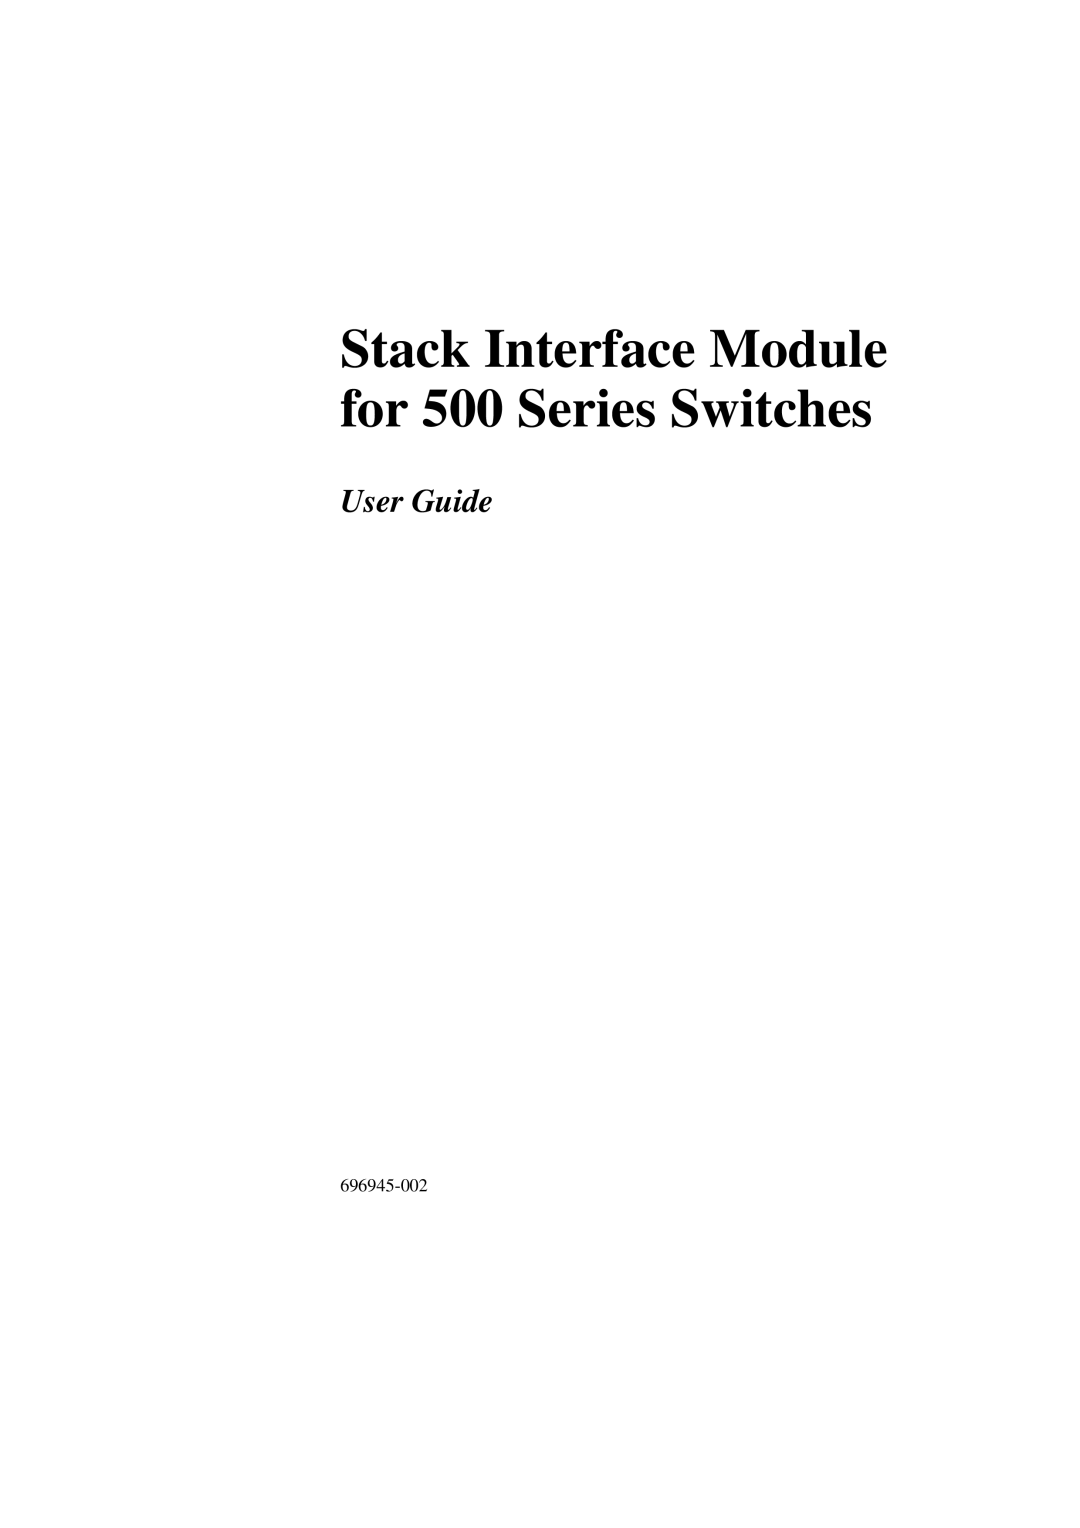 Intel manual Stack Interface Module for 500 Series Switches, User Guide 